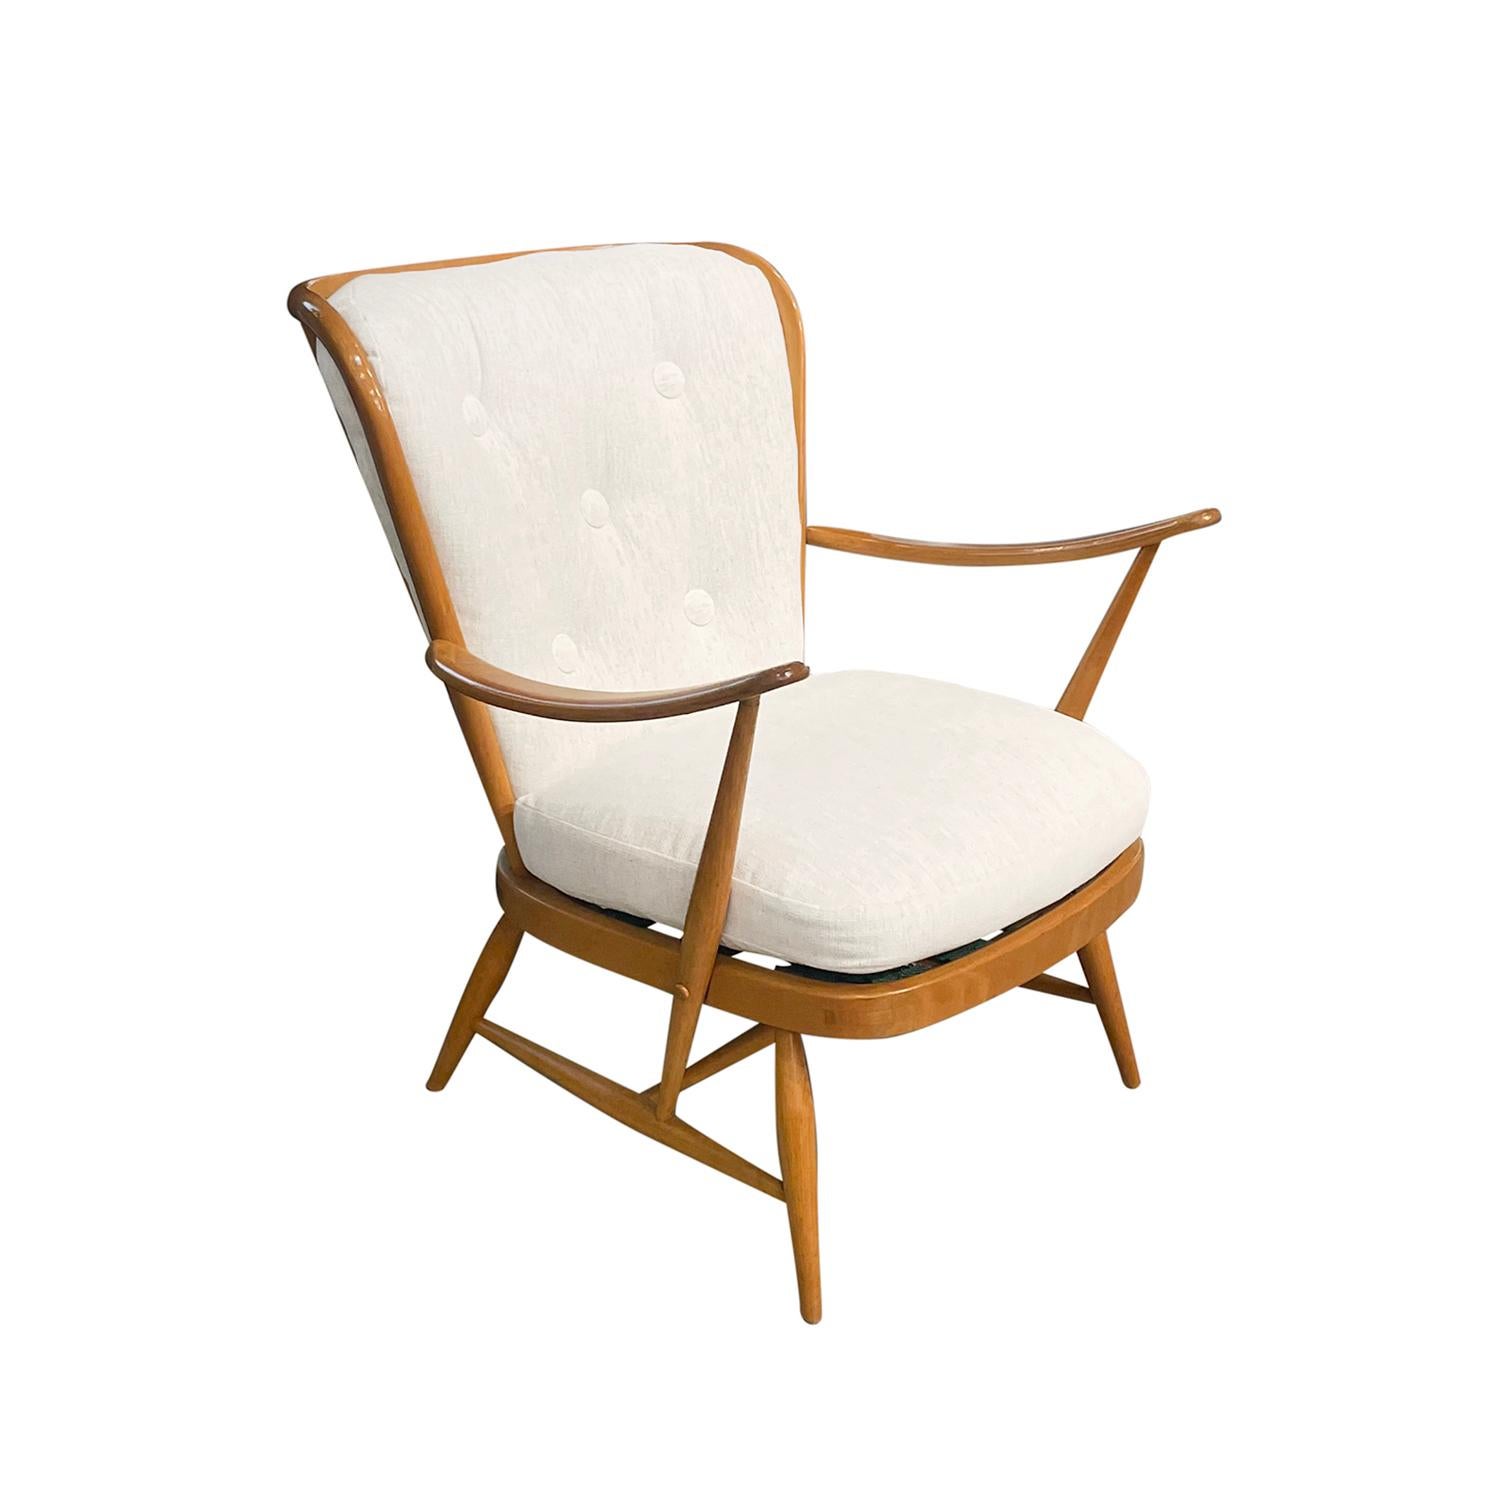 Hand-Carved 20th Century English Modern Beech Armchair - Single Vintage Side Chair by Ercol For Sale